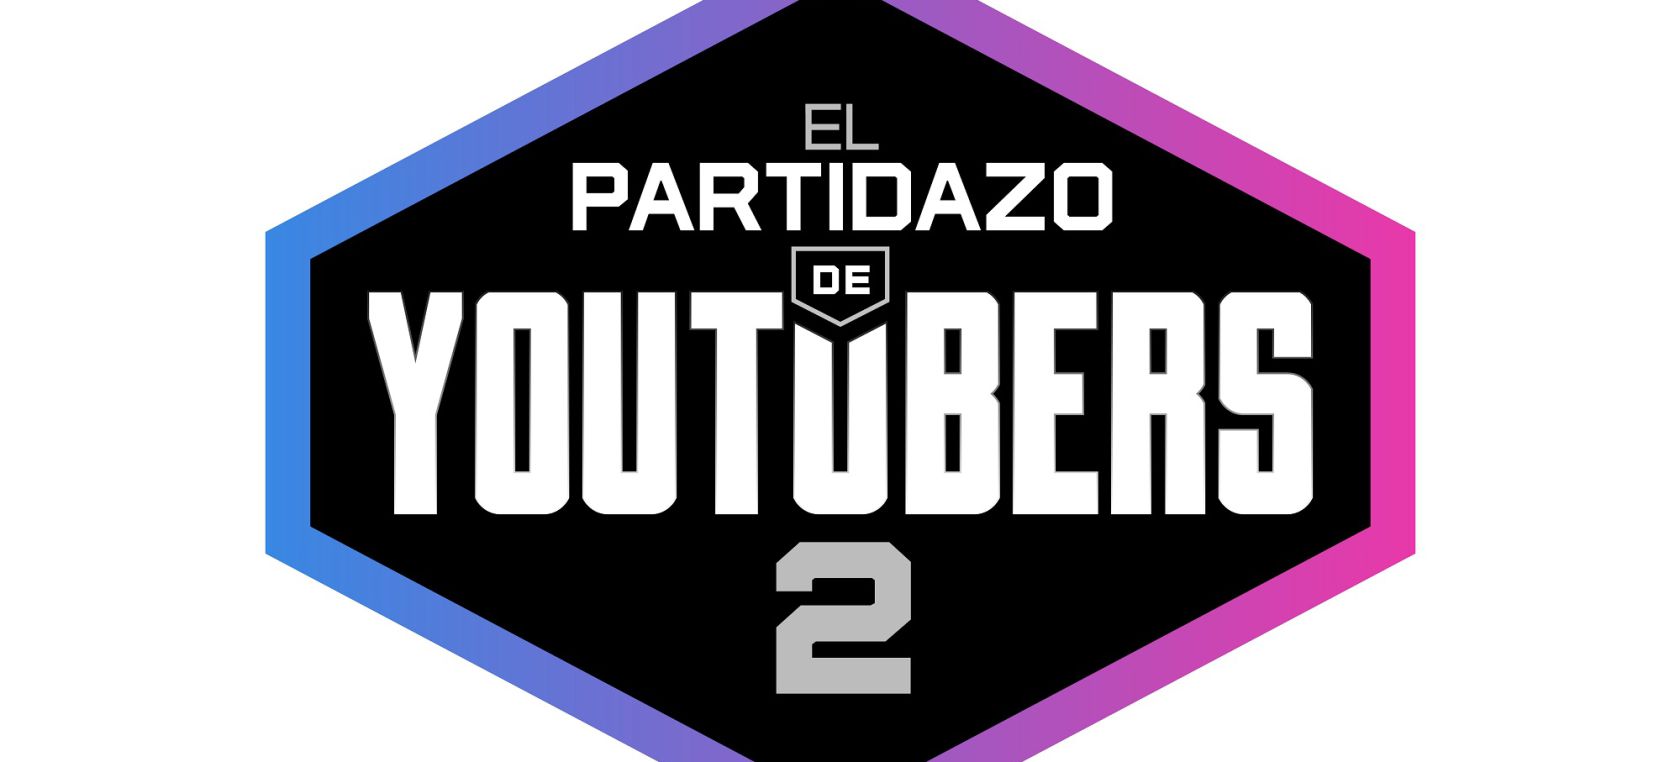 Partidazo Youtubers